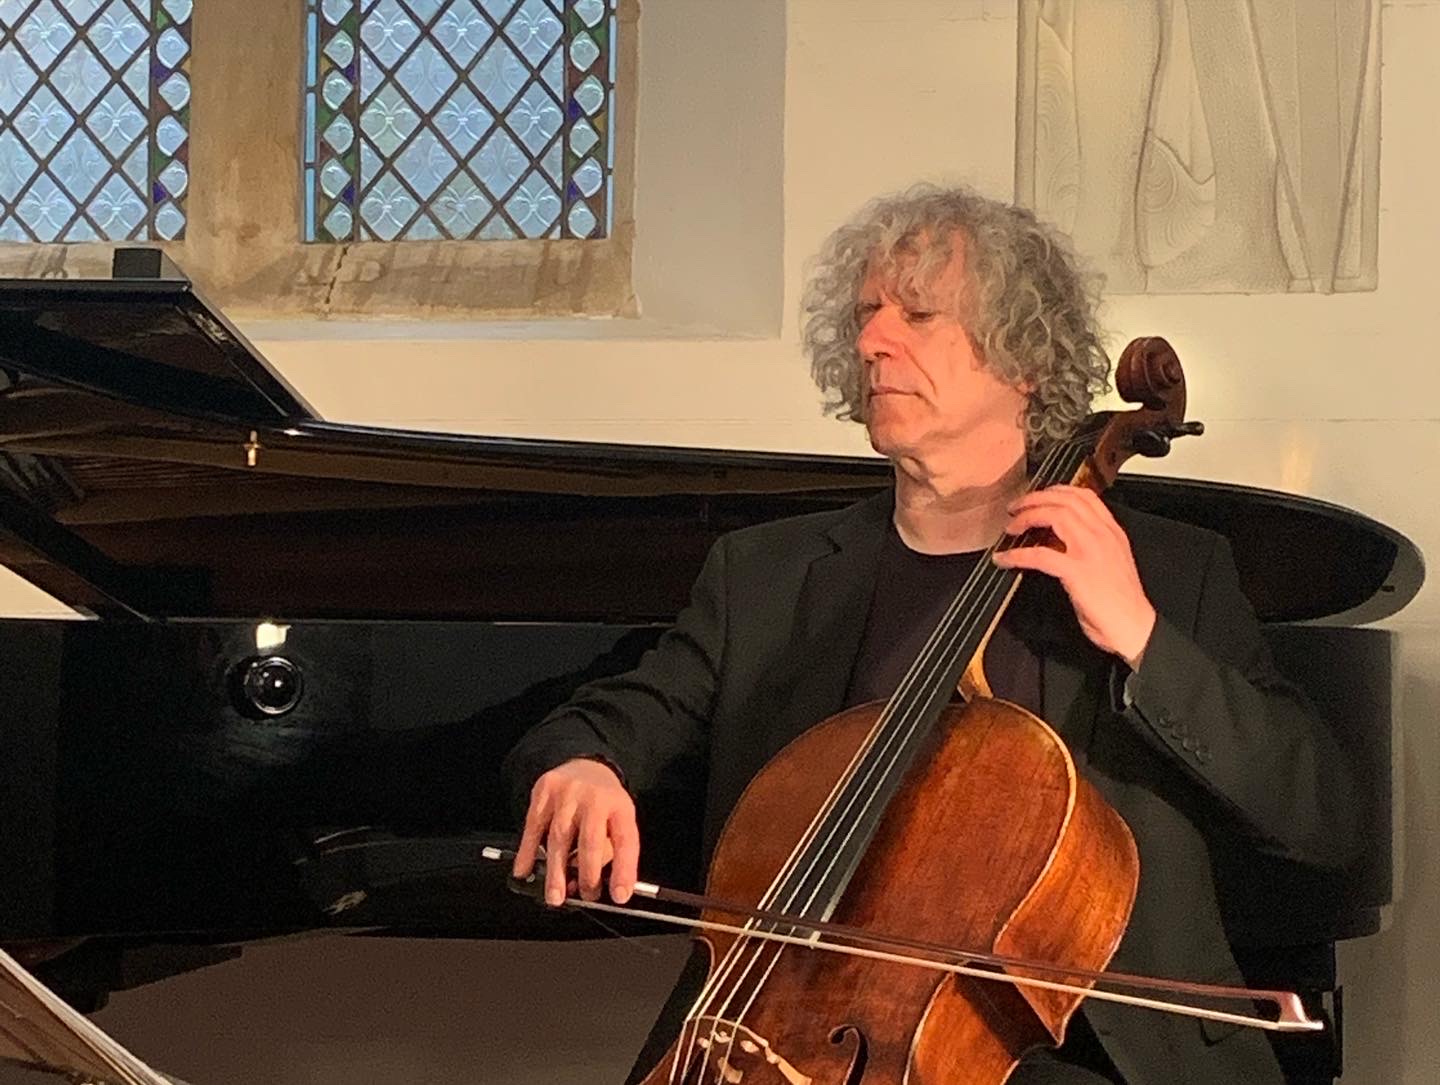 Steven Isserlis and Melvyn Tan perform at Mapperton for PalMusic UK